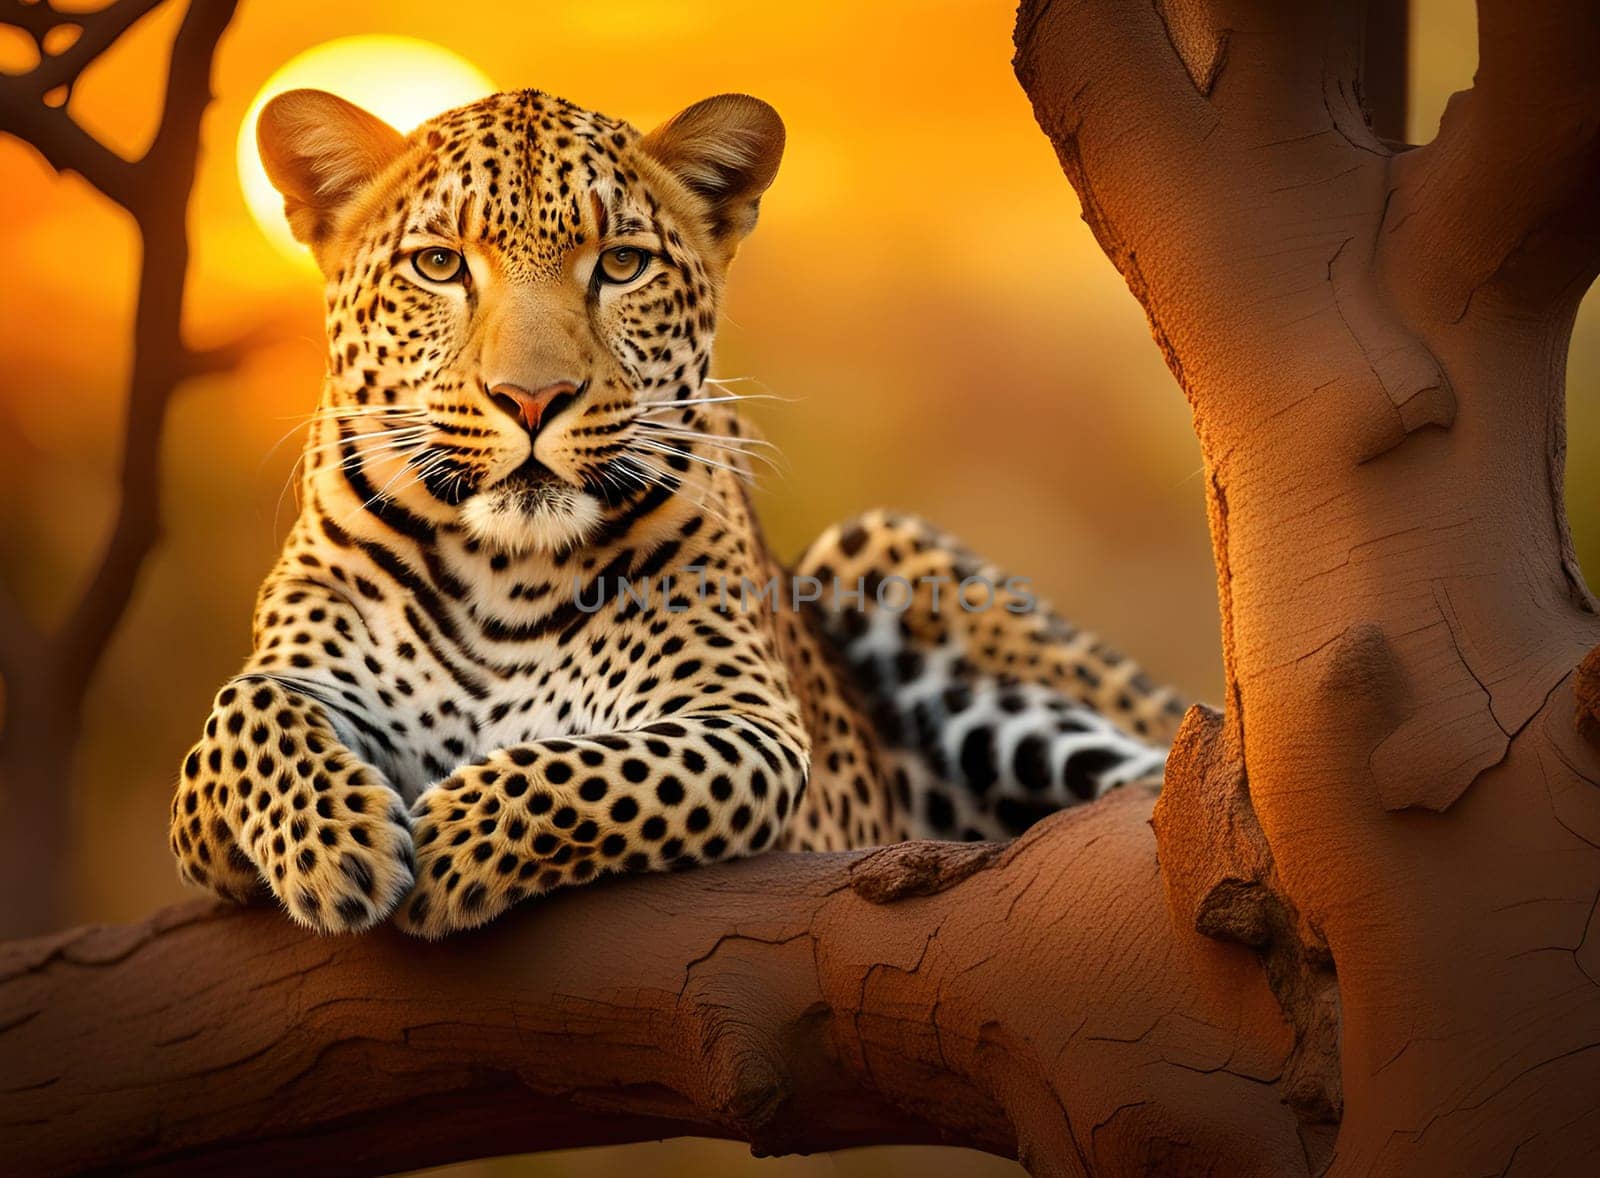 Leopard resting on a tree branch at sunset in the African savannah by yilmazsavaskandag